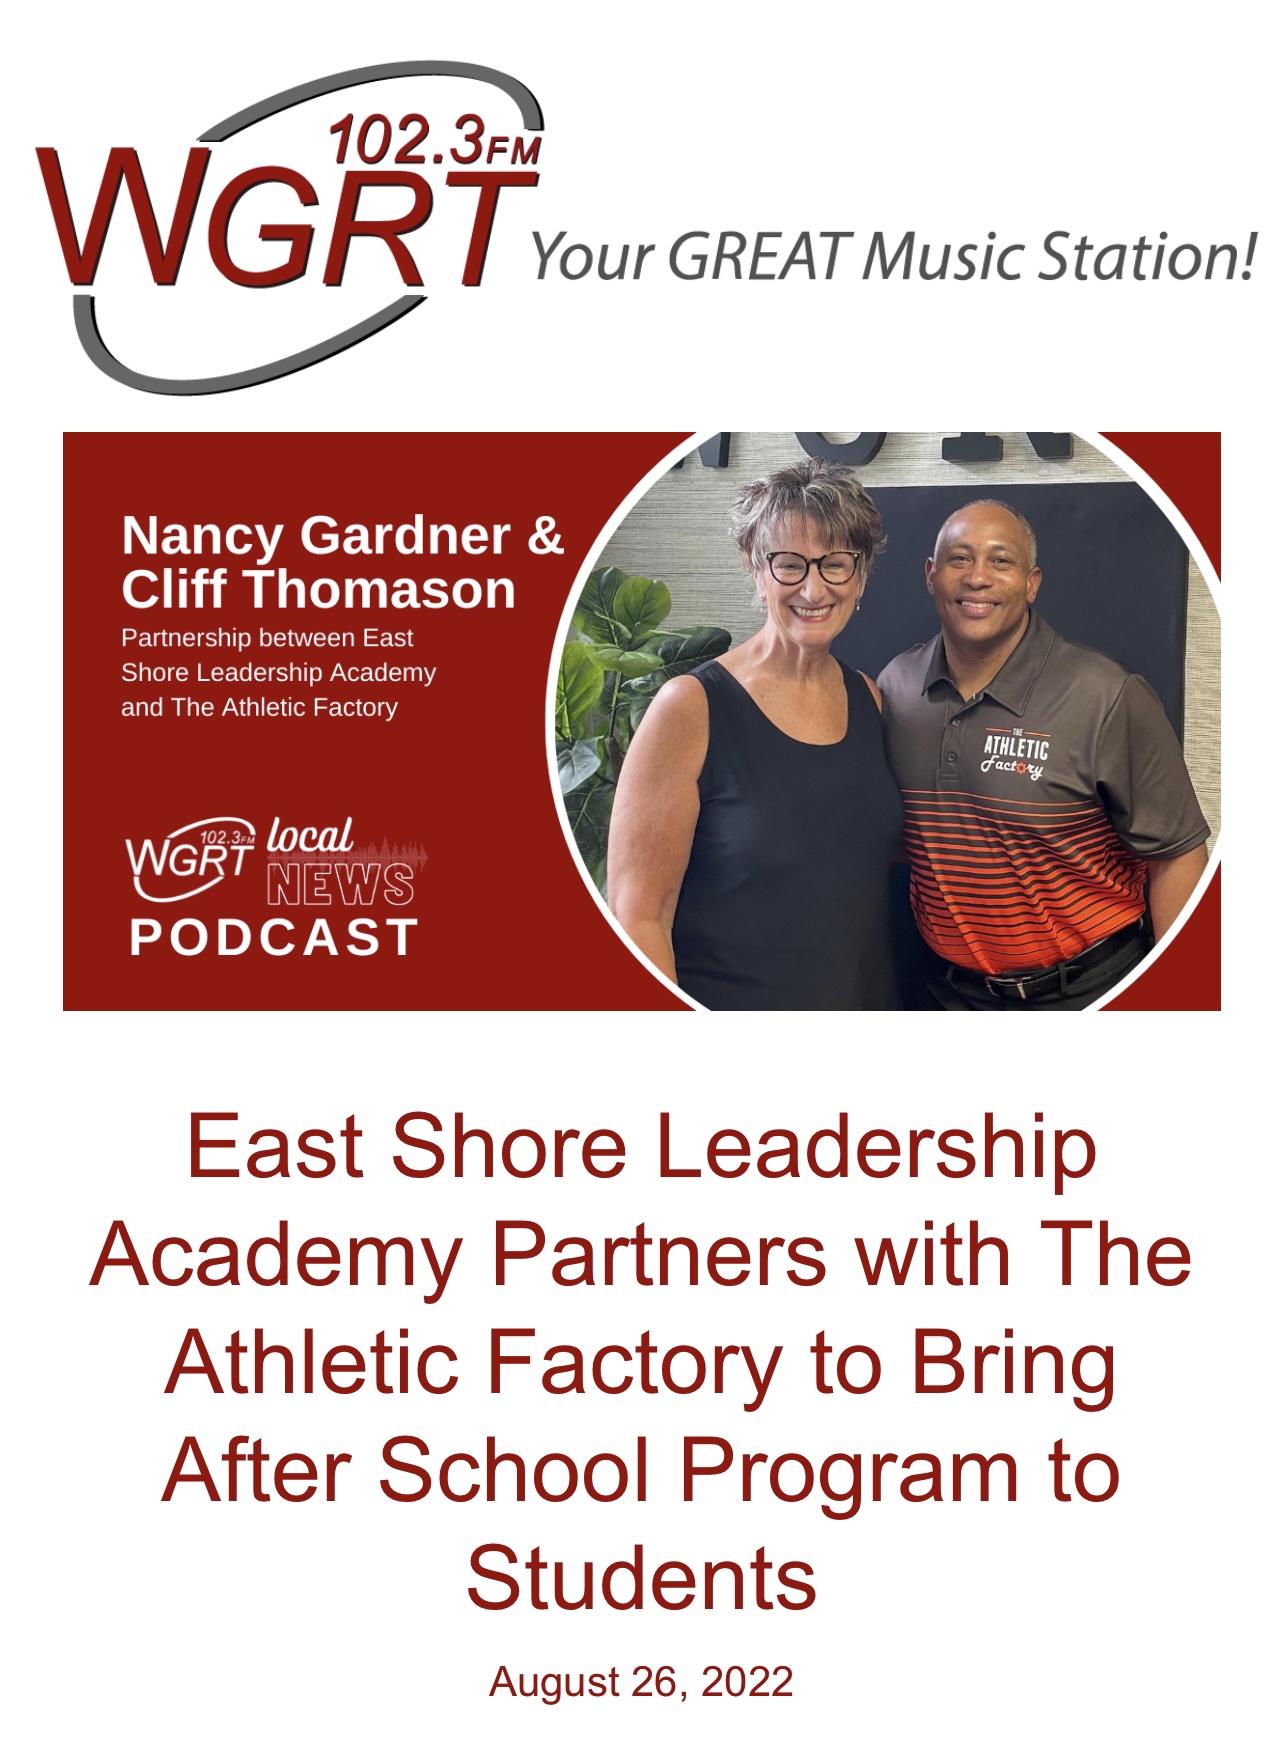 East Shore Leadership Academy Partners with The Athletic Factory